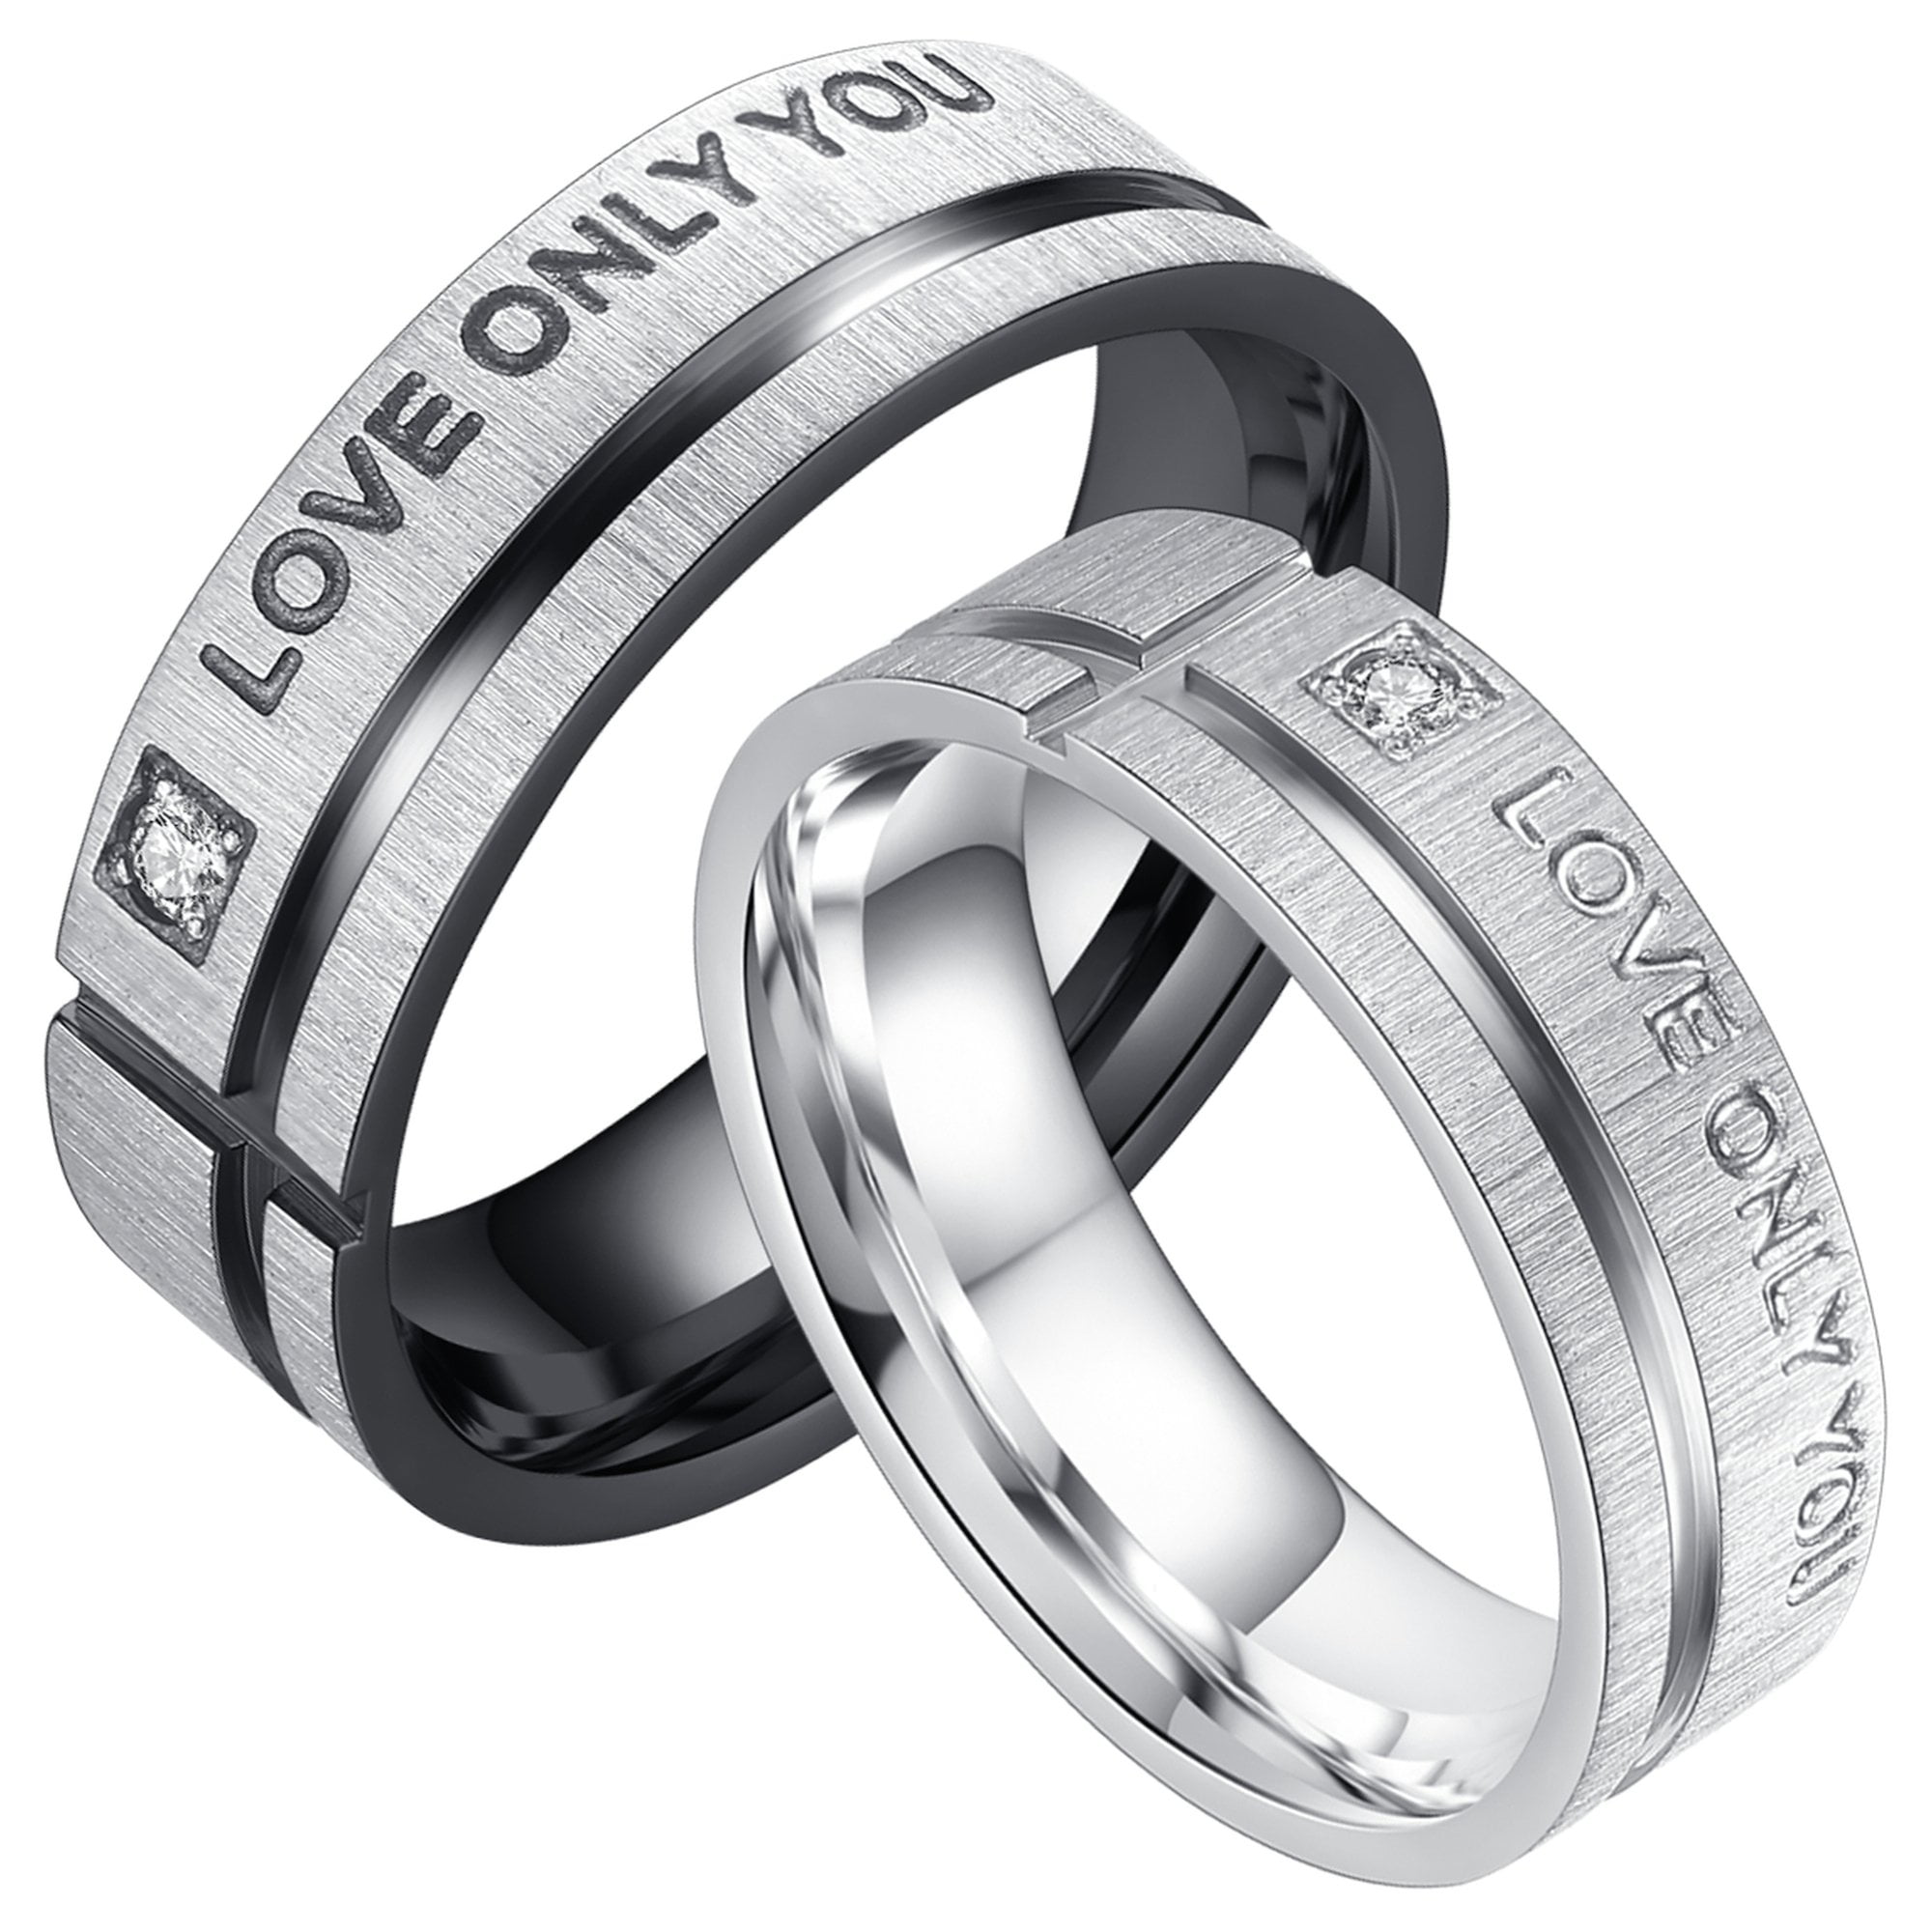 Unisex Ring Men's Women's Engagement Wedding Ring Band in 925 Sterling Silver Promise Bands